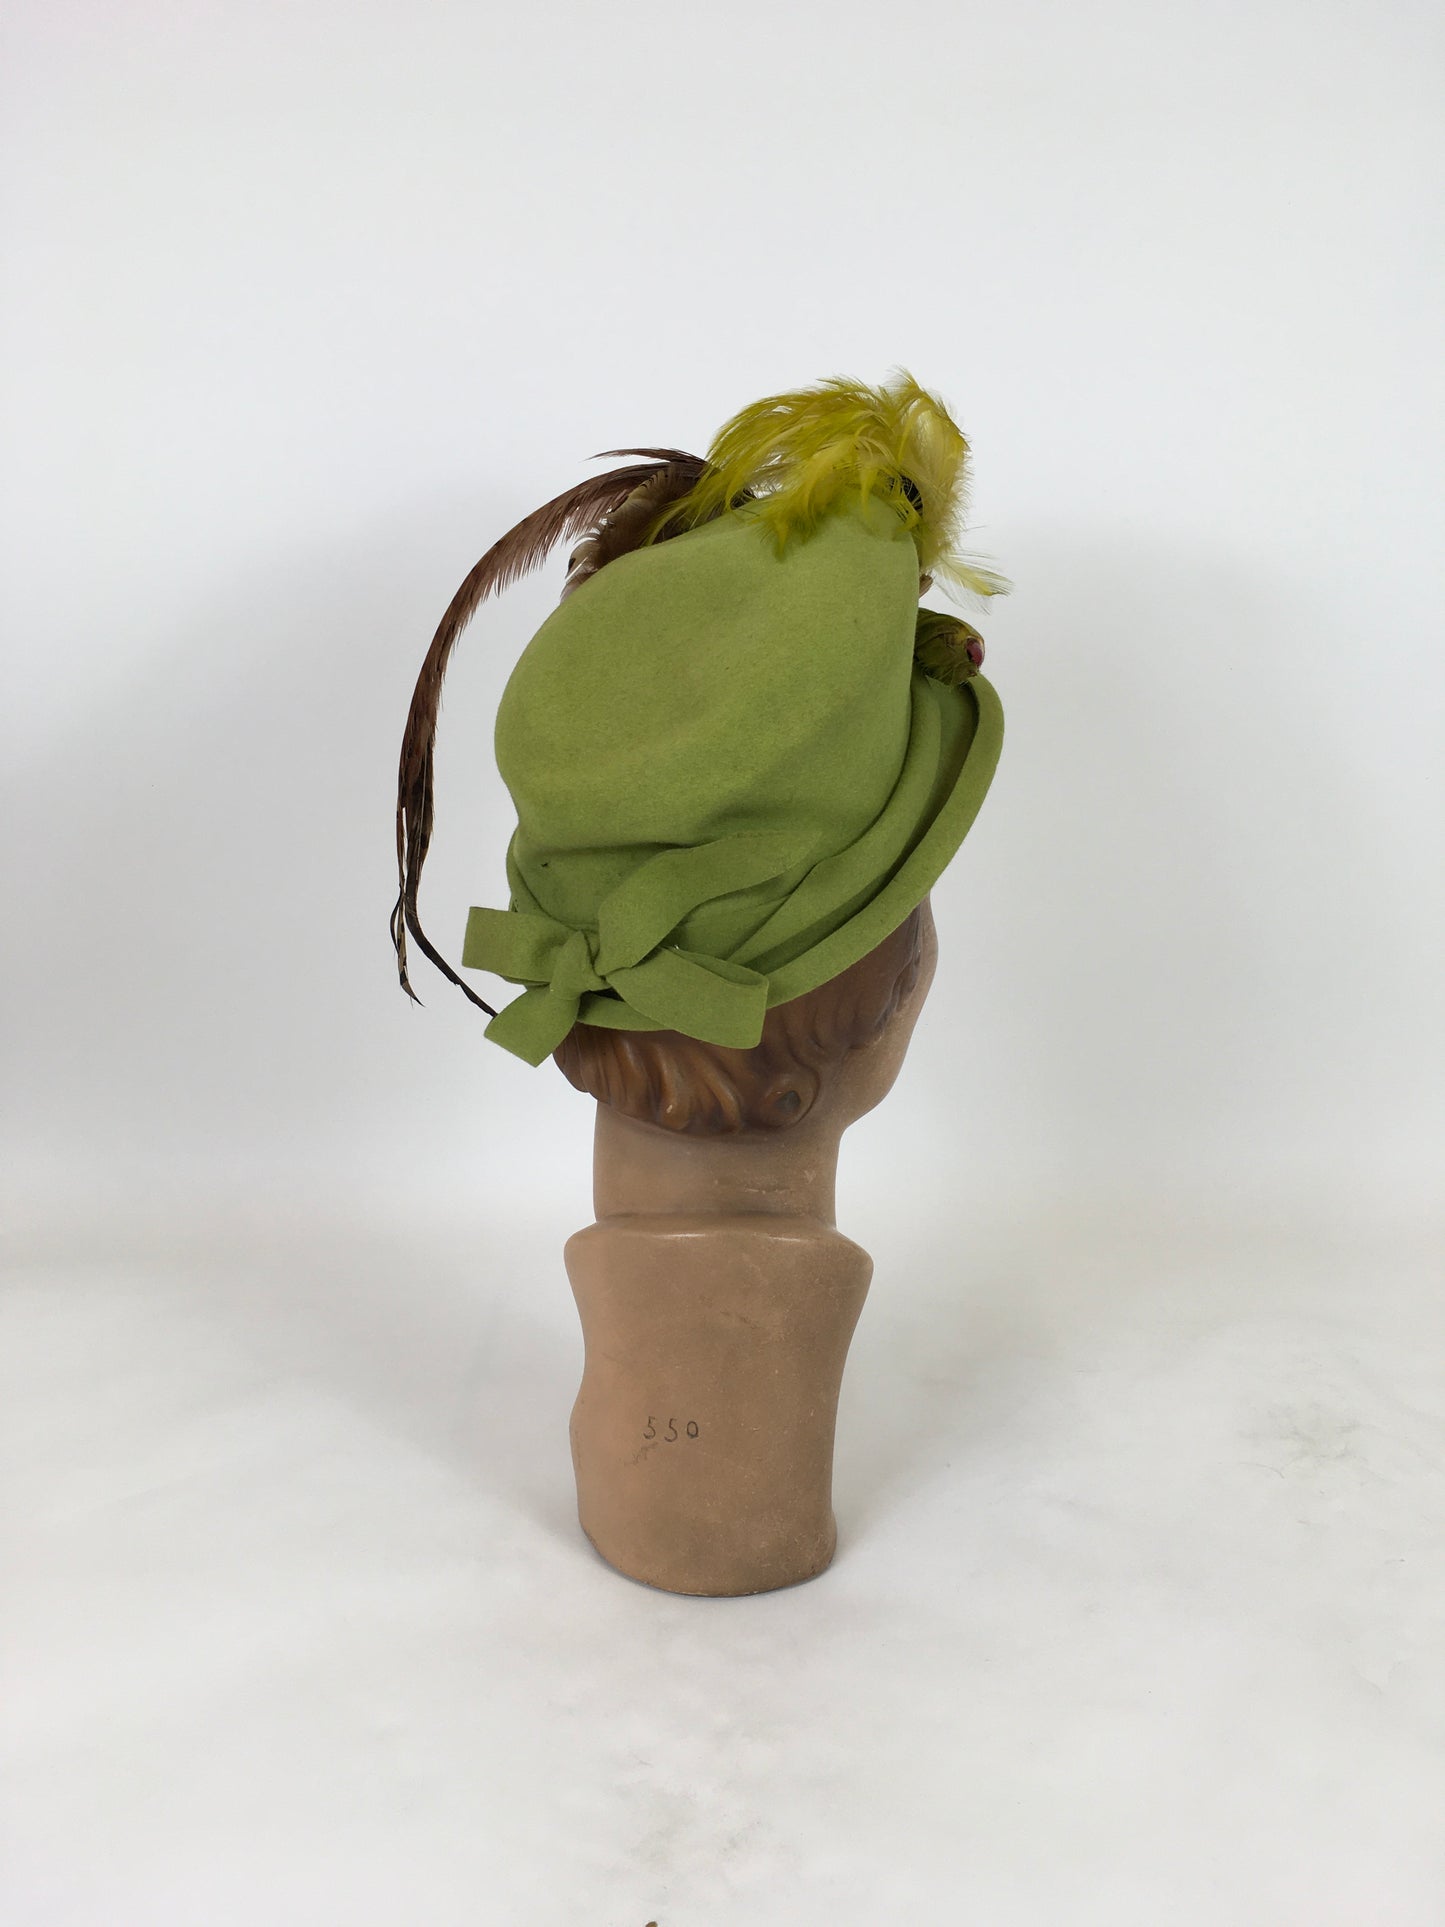 Original 1940's Sensational Chartreuse Hat - Adorned With a Bird Of Paradise